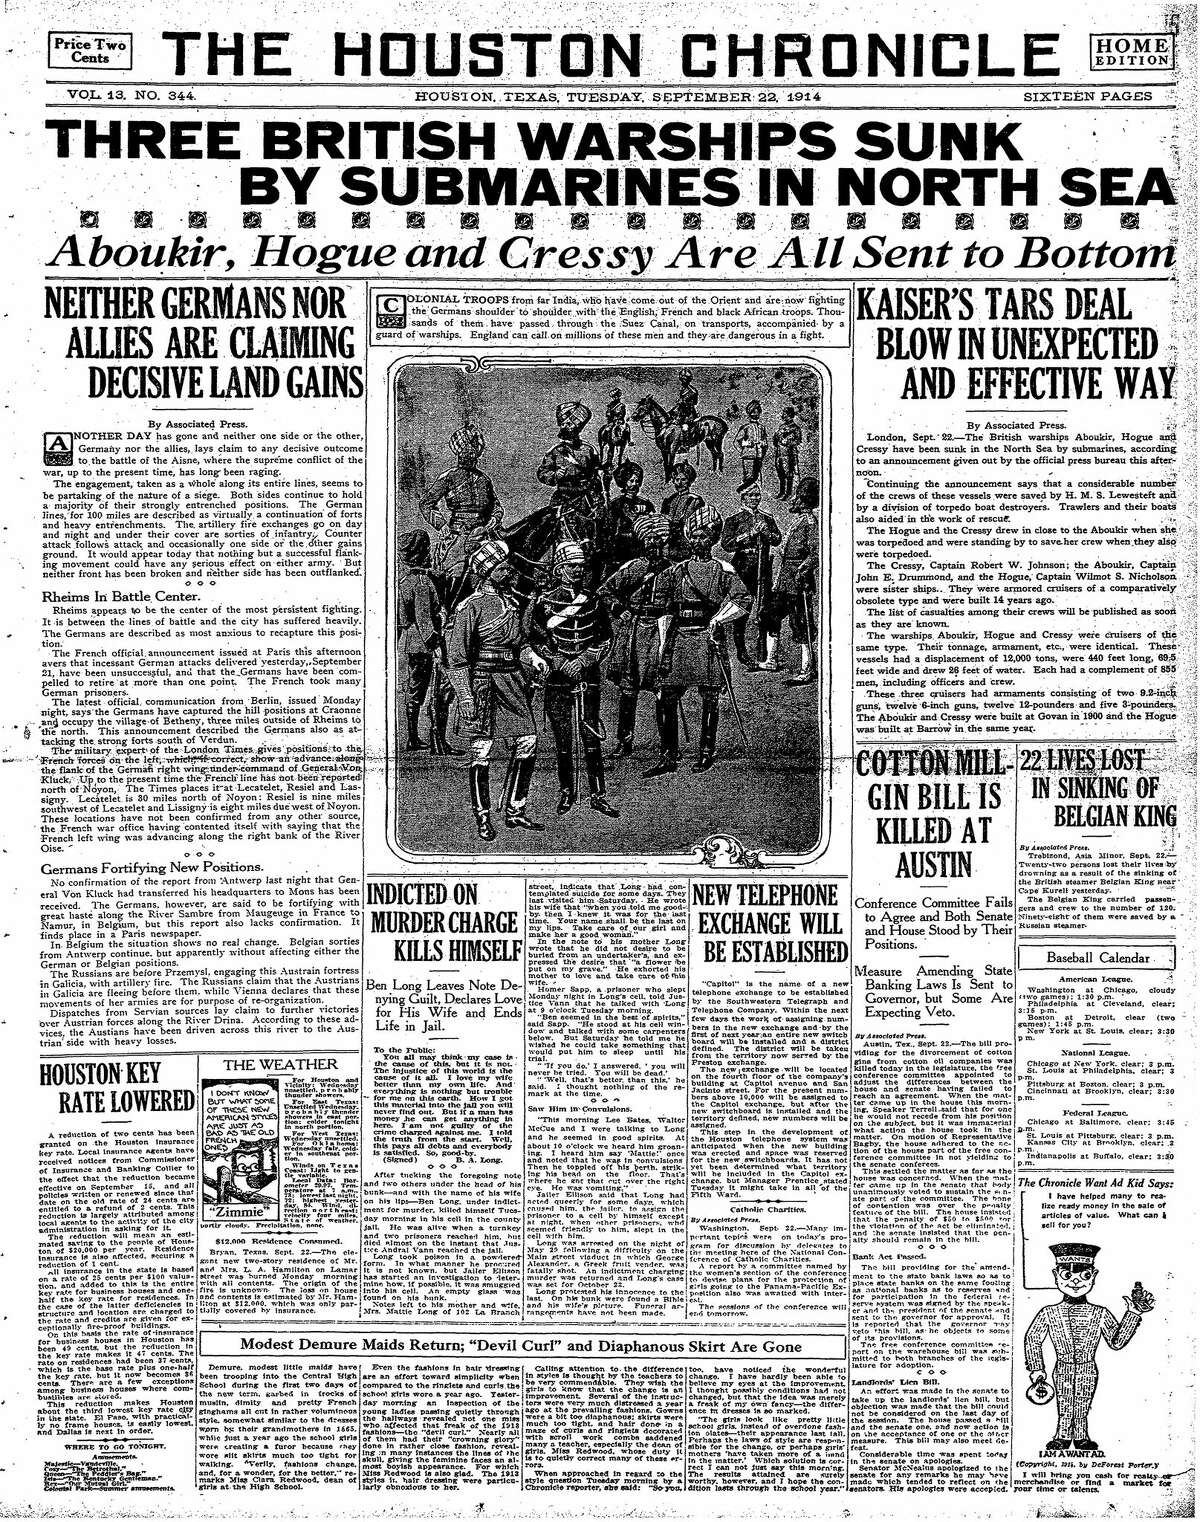 Houston Chronicle front page for Sept. 22, 1914.